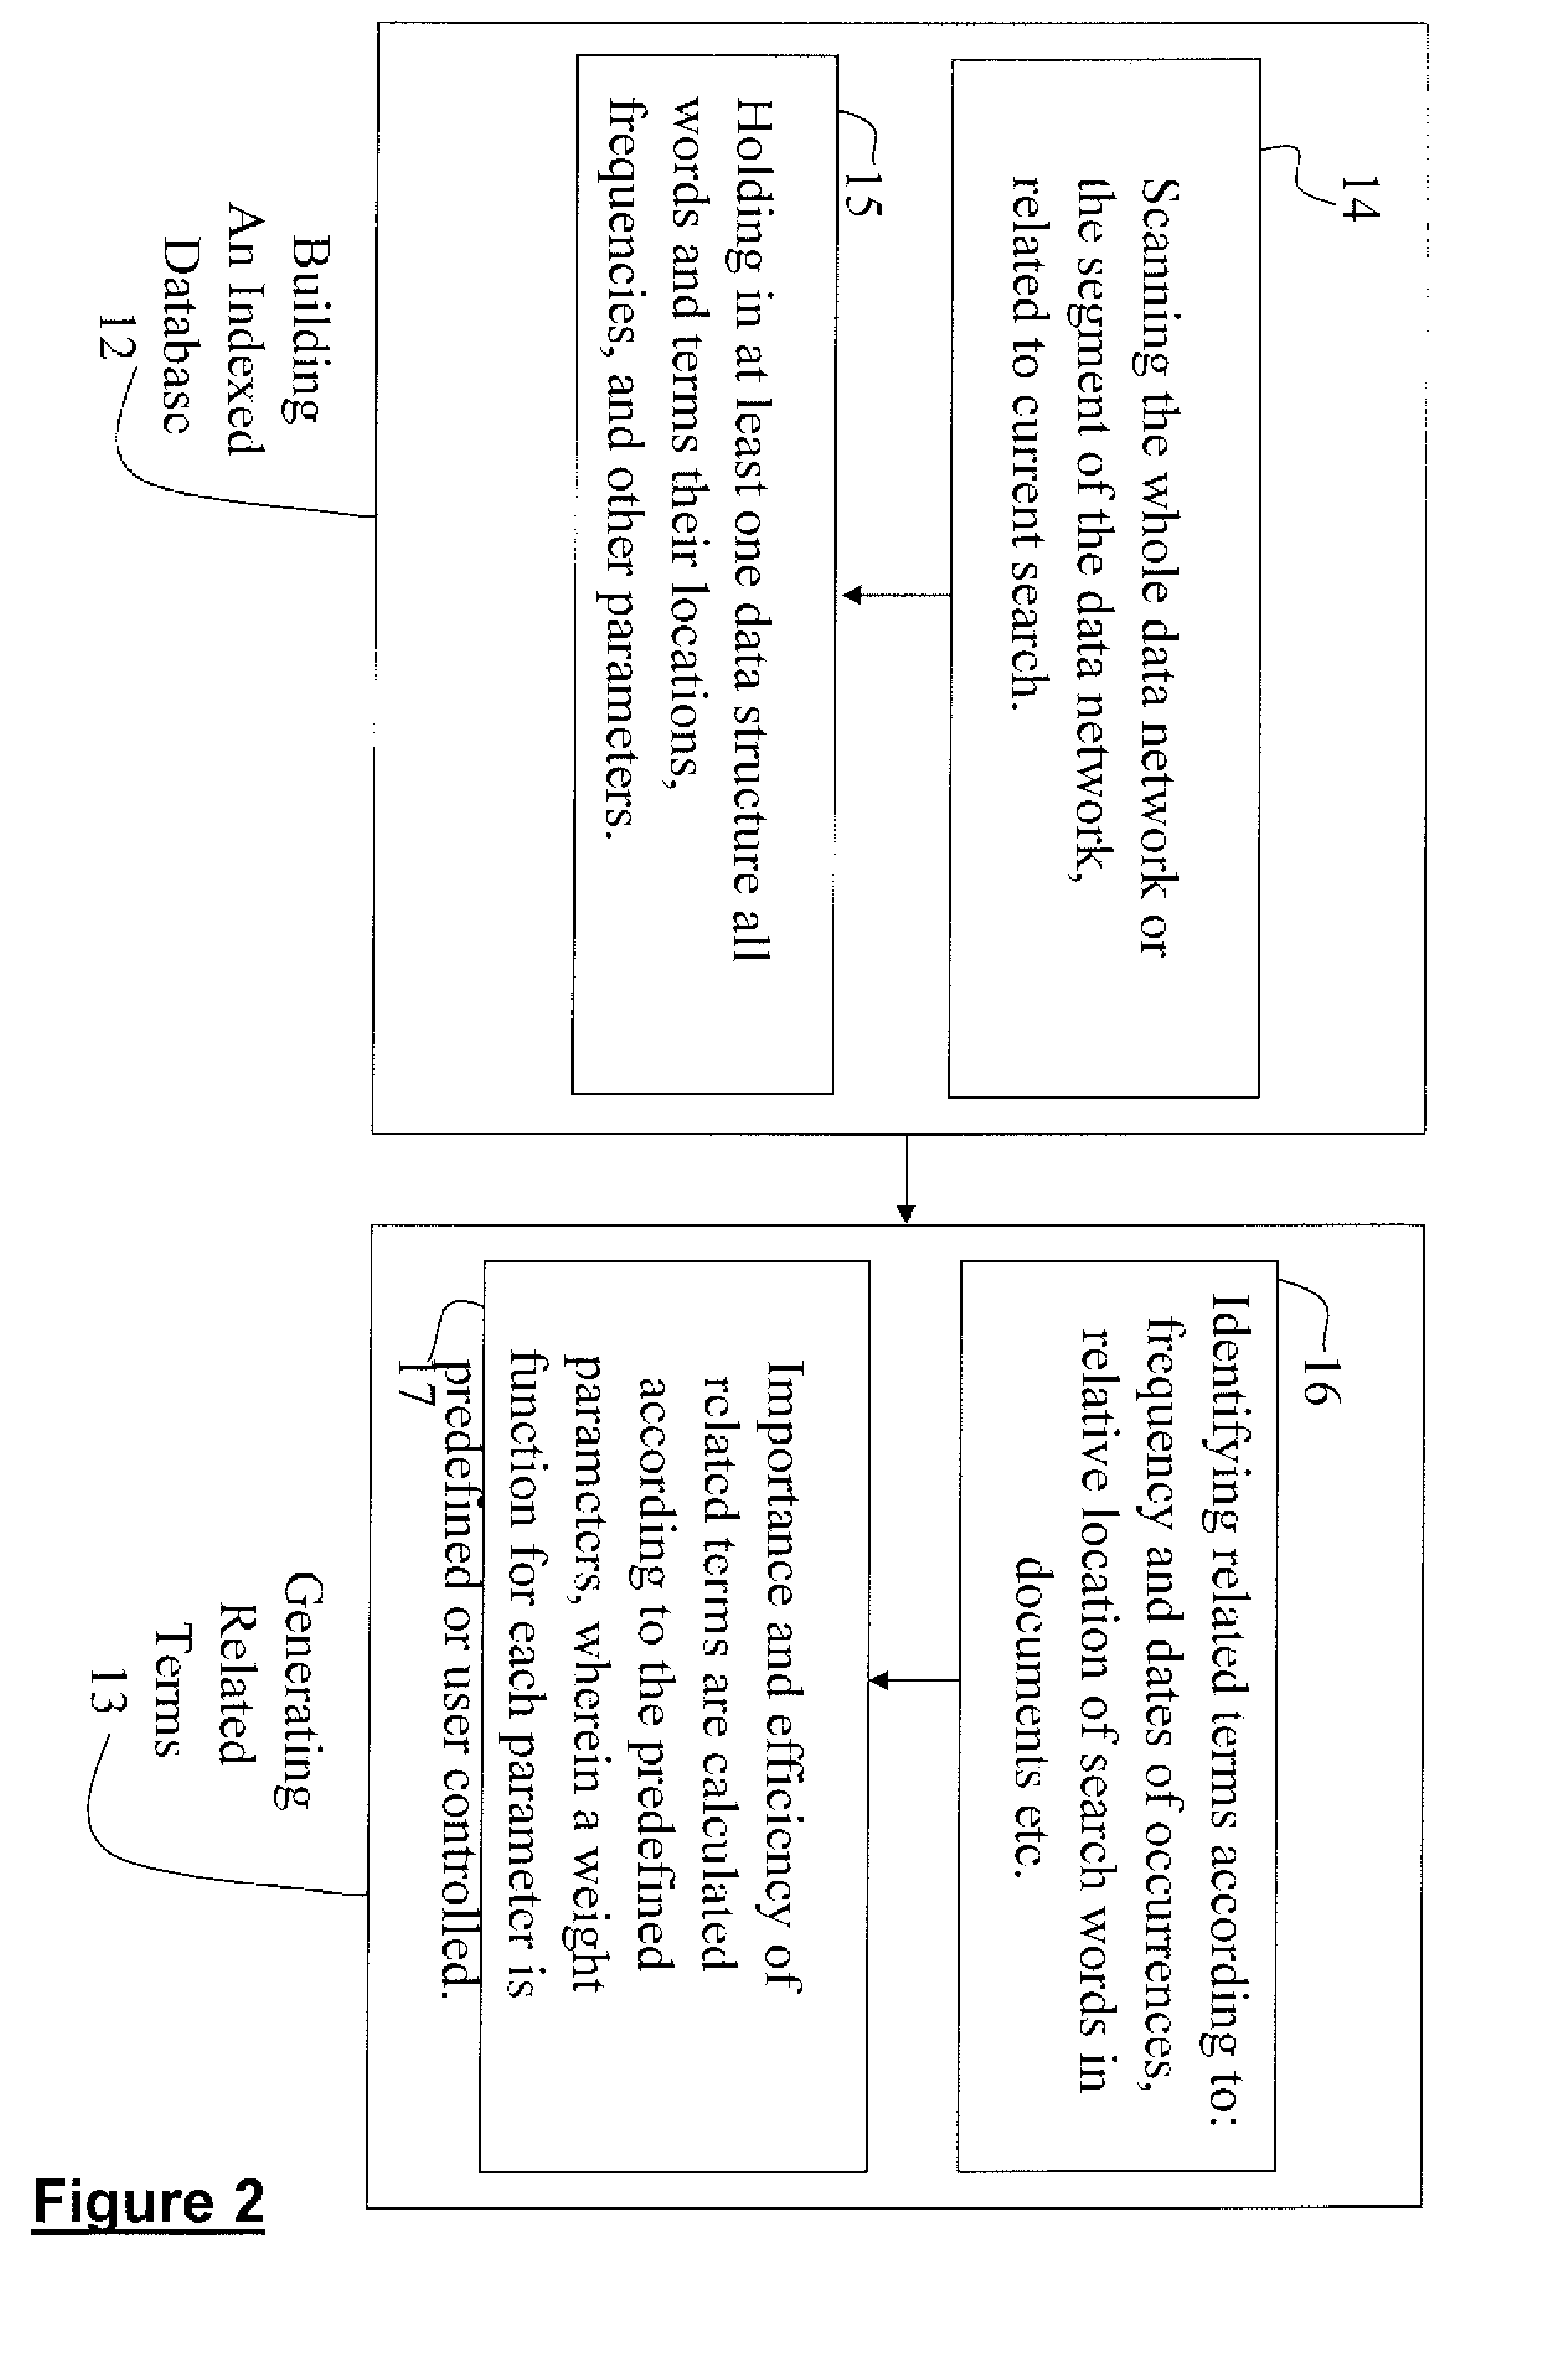 System for facilitating search over a network